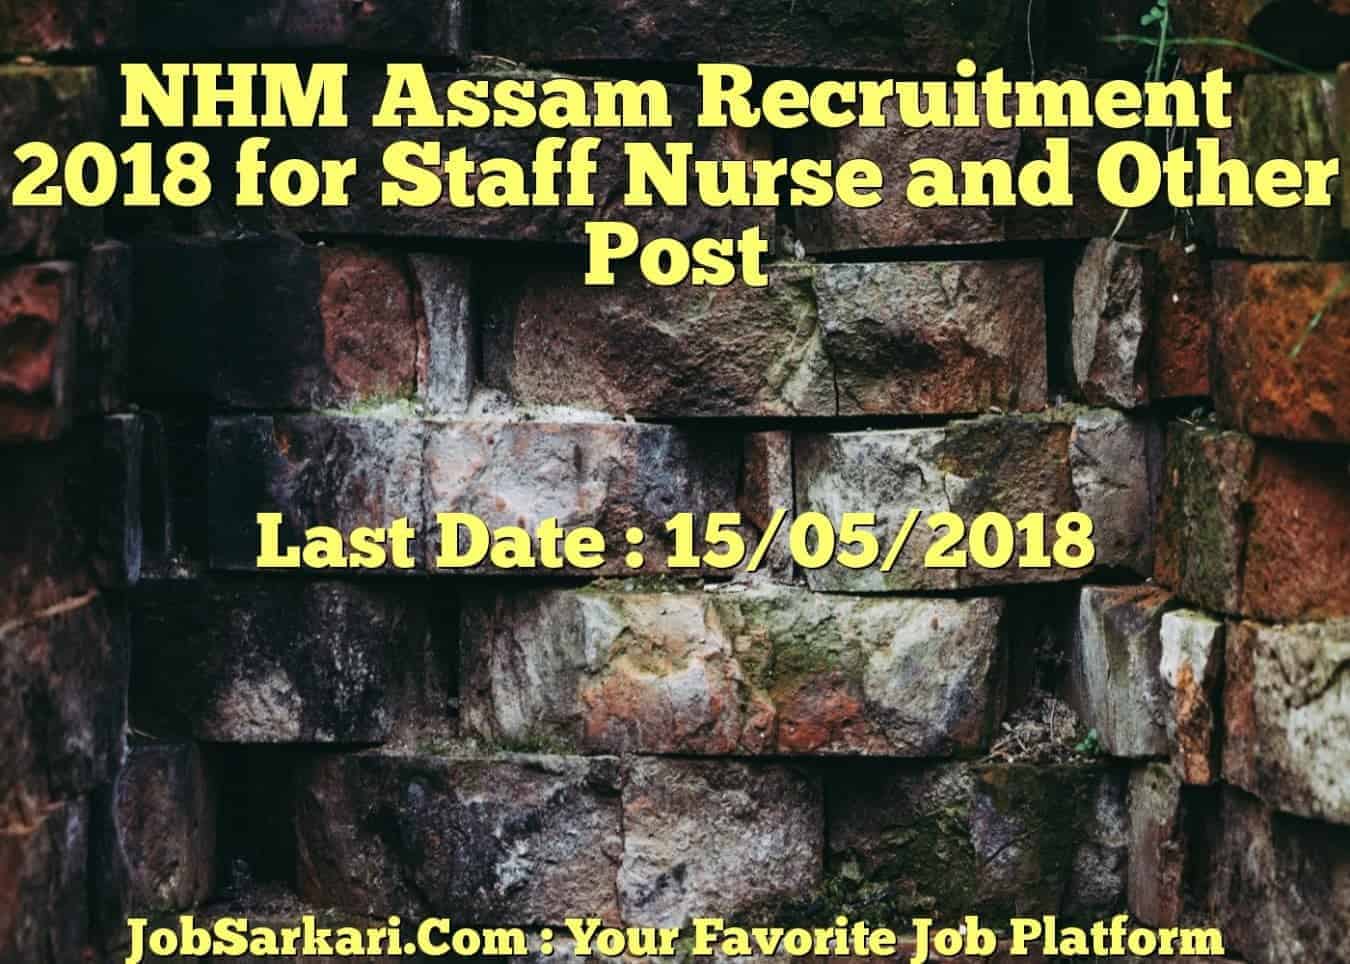 NHM Assam Recruitment 2018 for Staff Nurse and Other Post